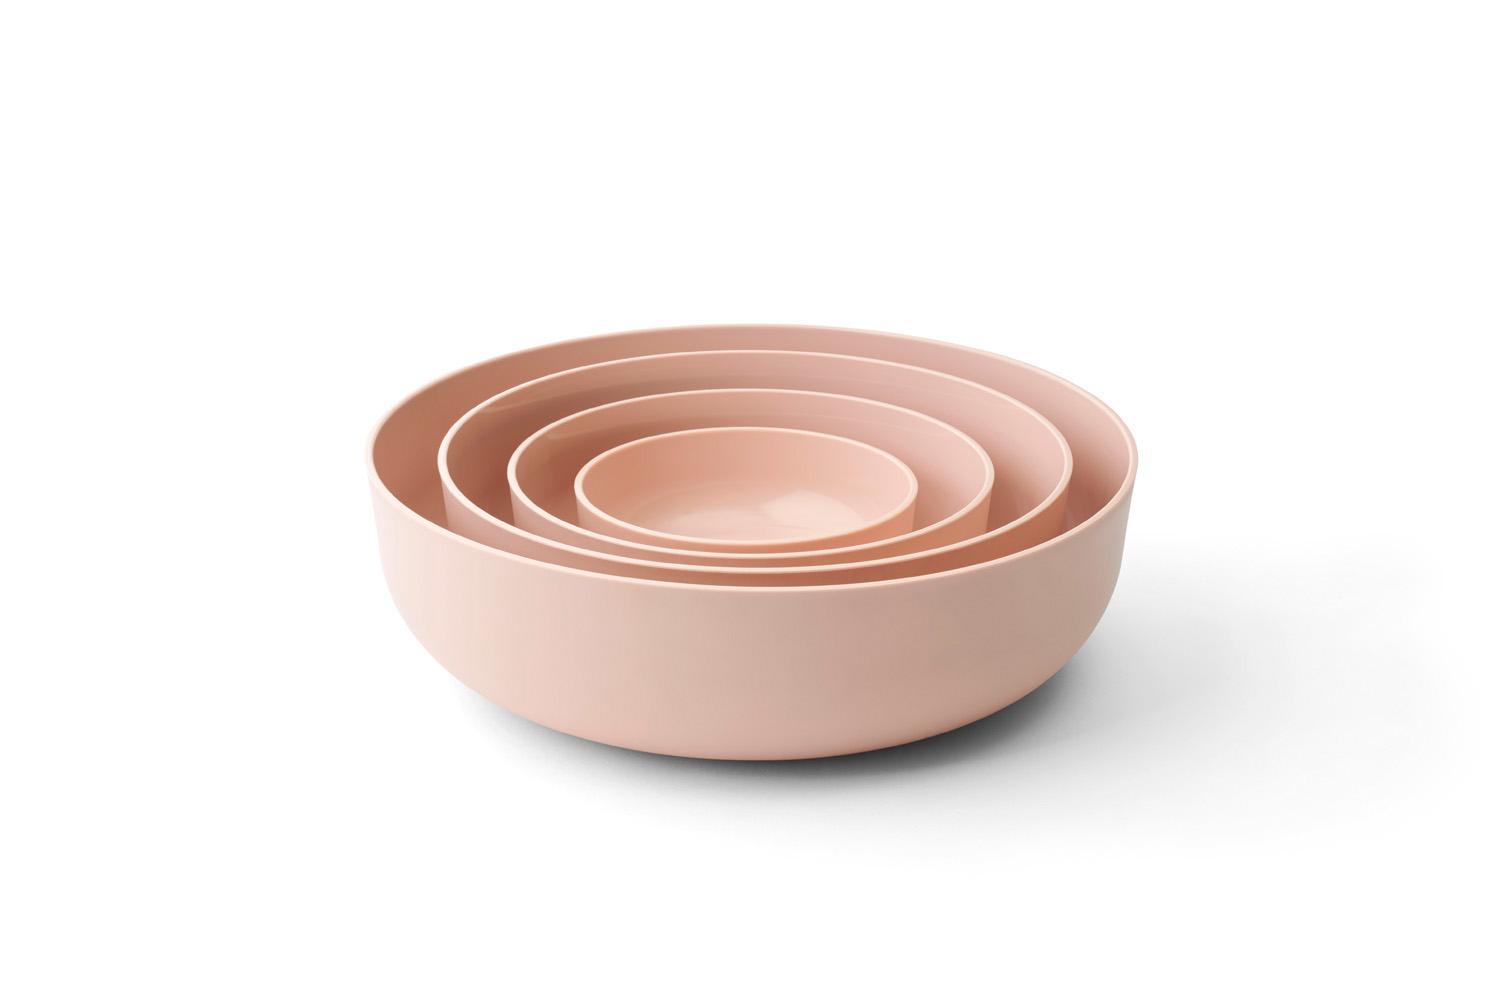 Styleware reusable nesting bowls in blush, microwave and dishwasher safe, seal tight, stackable, nesting. Designed and made in Australia, available in 4-piece, 2-piece sets and for individual purchase. Make the everyday anything but.